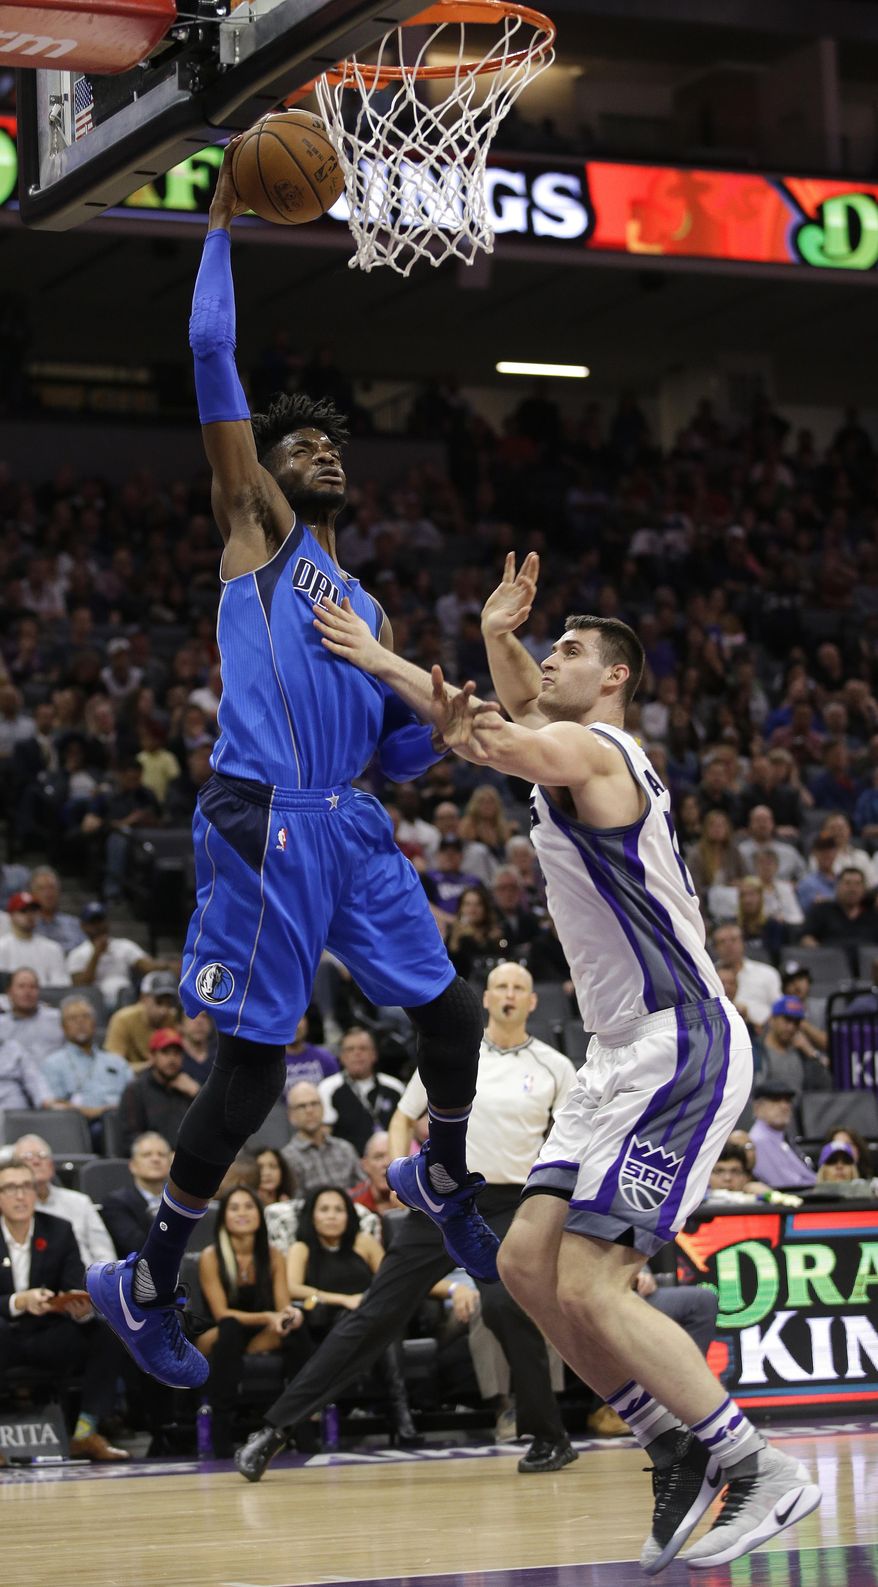 Dallas Mavericks forward Nerlens Noel, left, goes to the basket against Sacramento Kings center Georgios Papagiannis during the first half of an NBA basketball game Tuesday, April 4, 2017, in Sacramento, Calif. (AP Photo/Rich Pedroncelli)